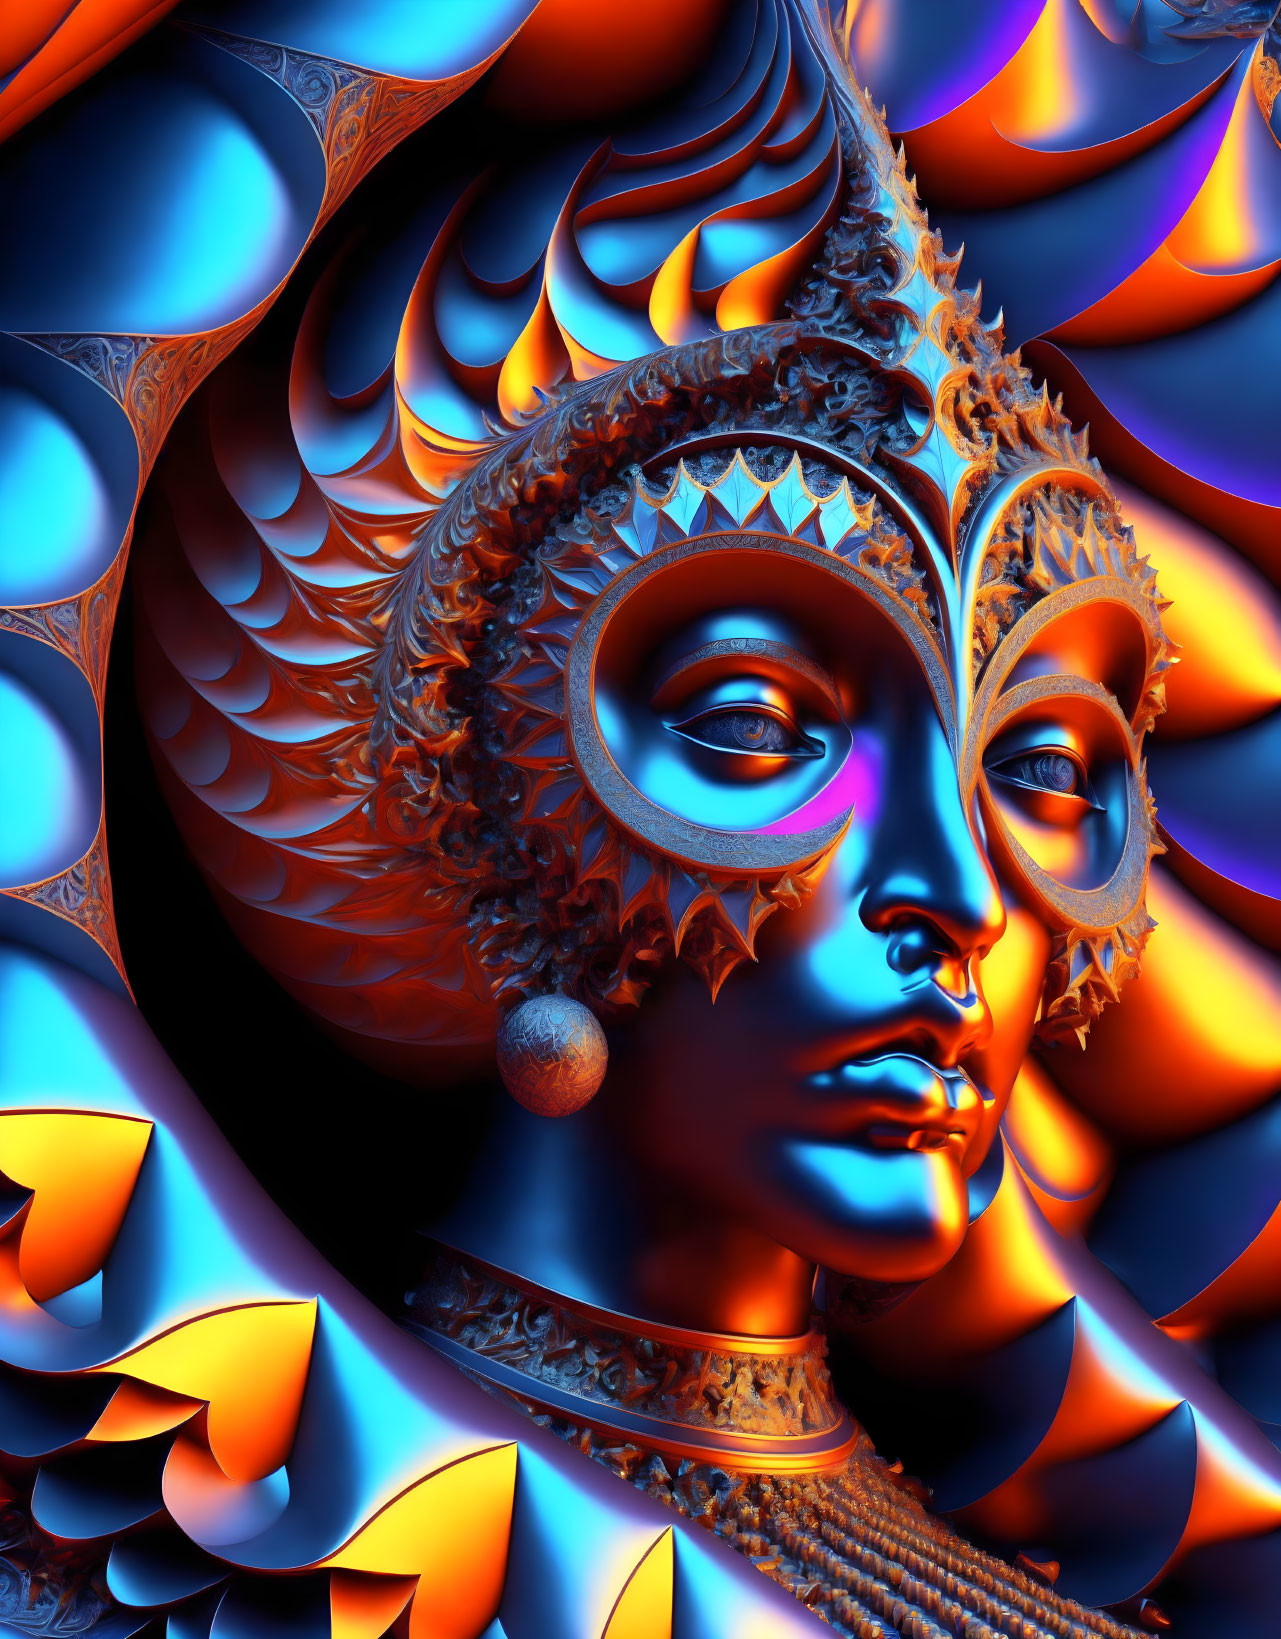 Colorful digital artwork: Blue and orange fractal character with intricate details